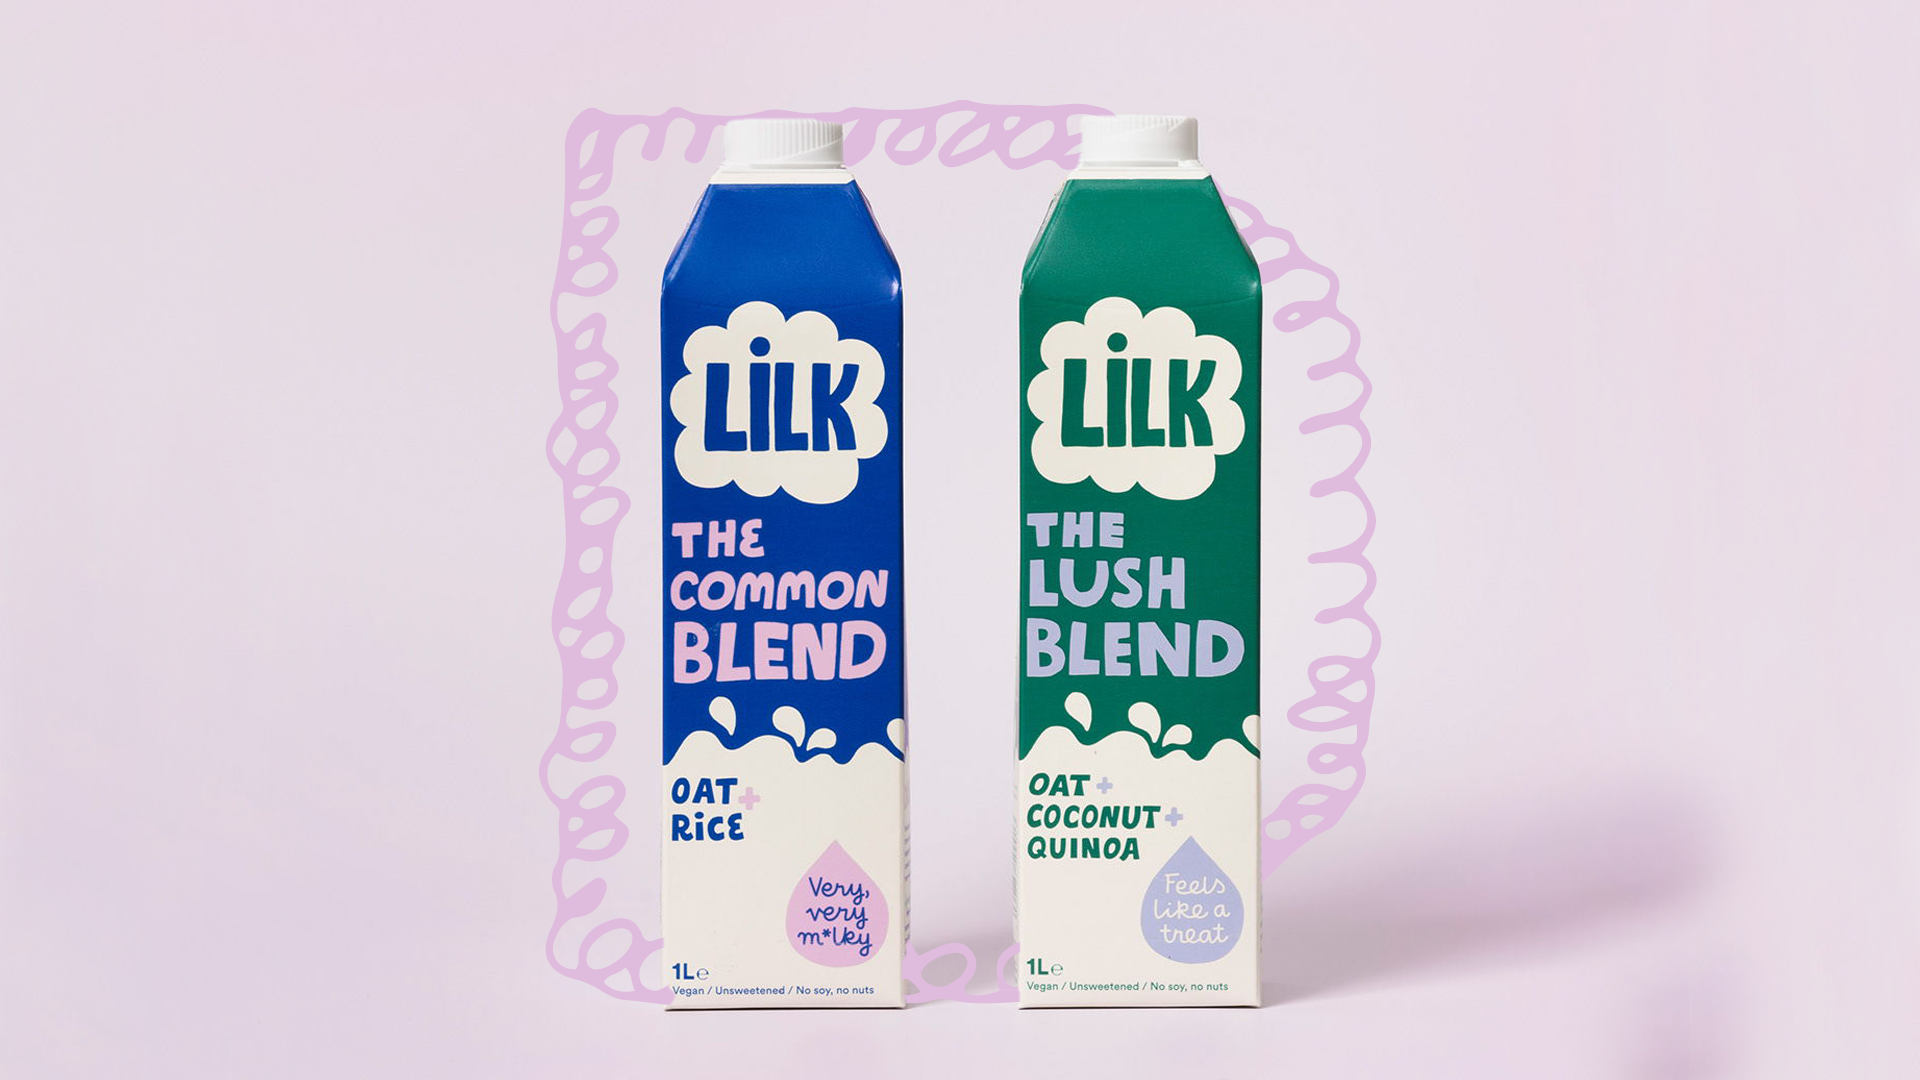 Pack of the Month: Handmade Elements Bring Lilk’s Plant-Based Milk To Life